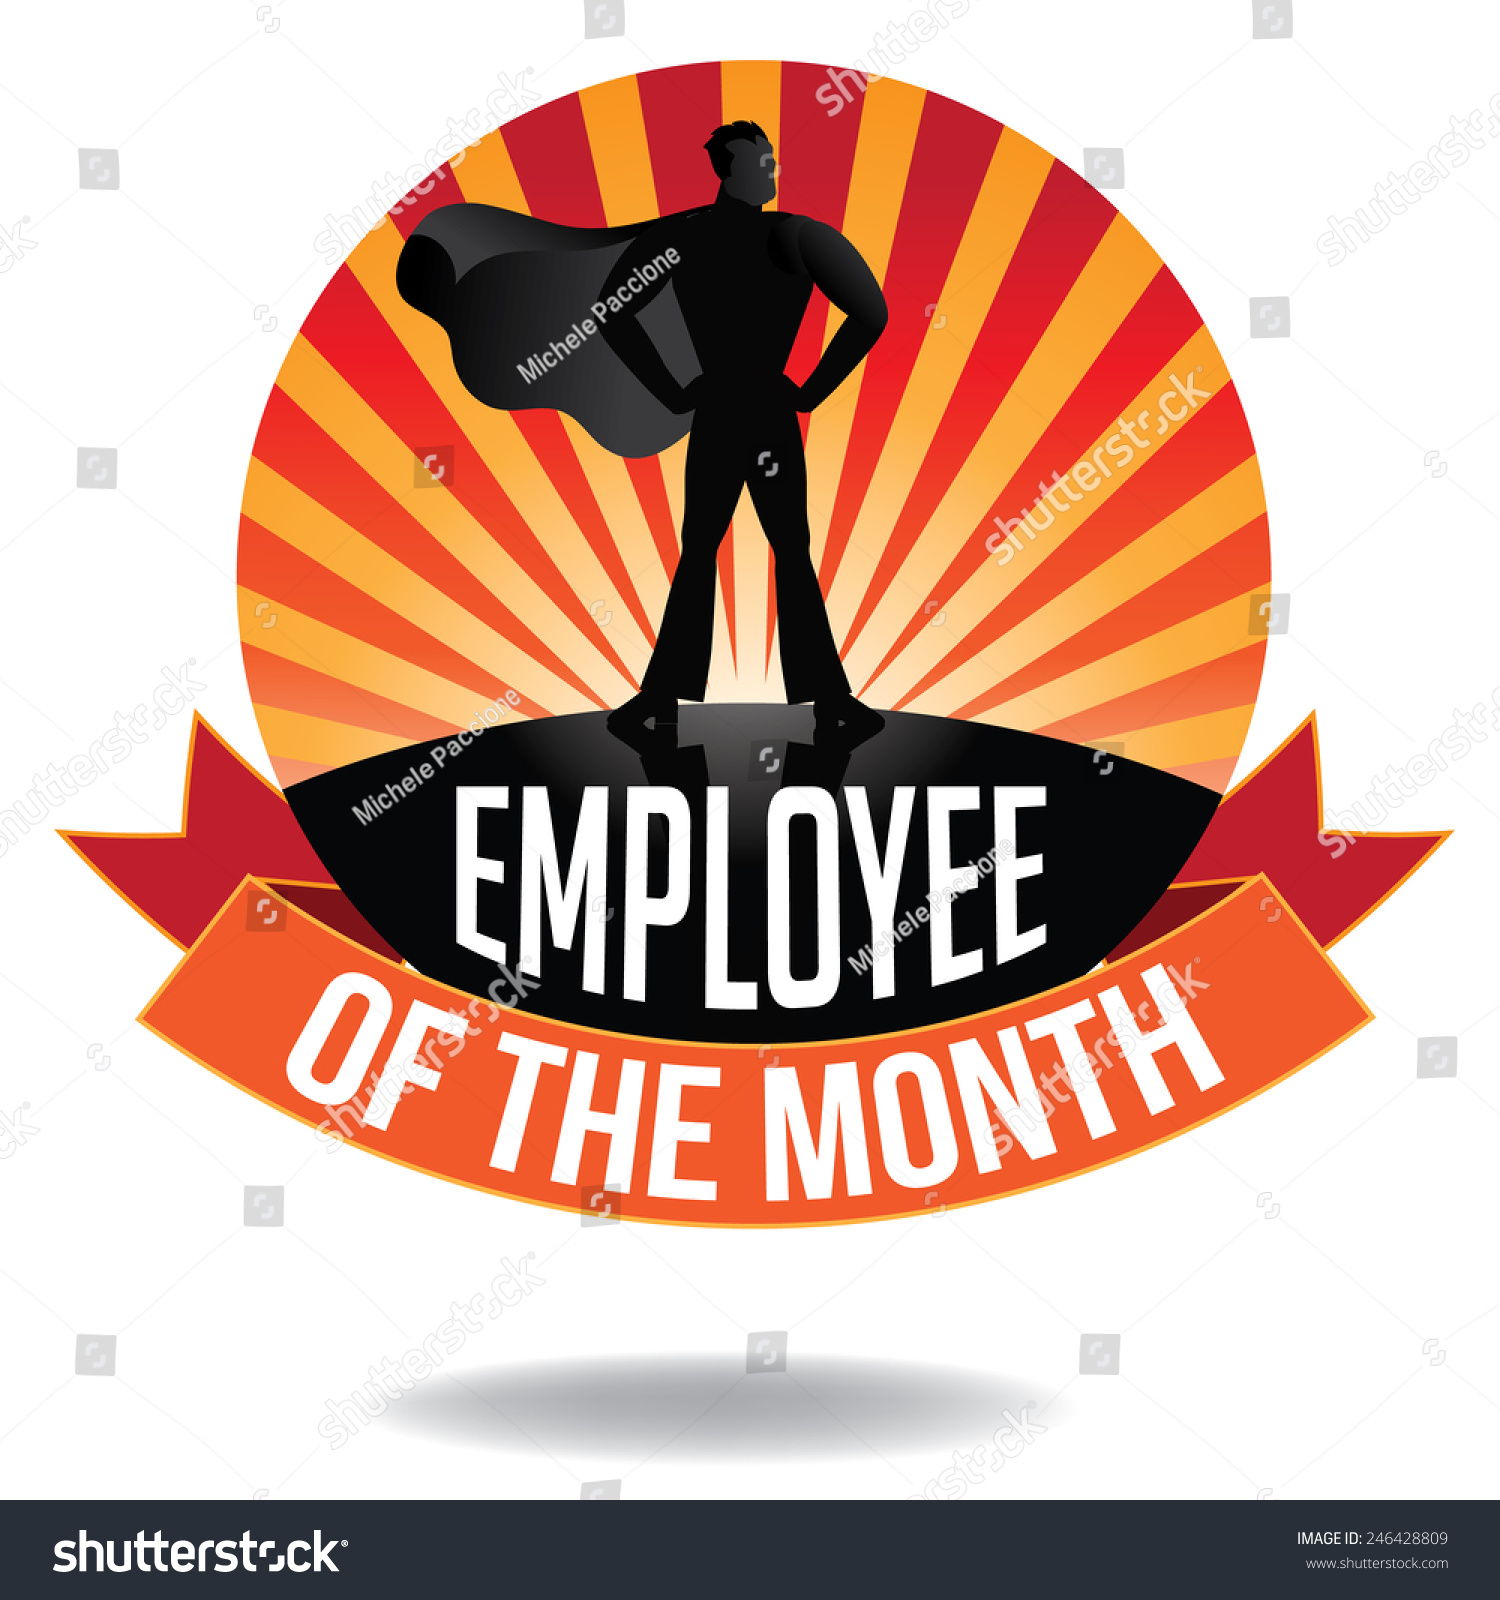 free clipart employee of the month - photo #11